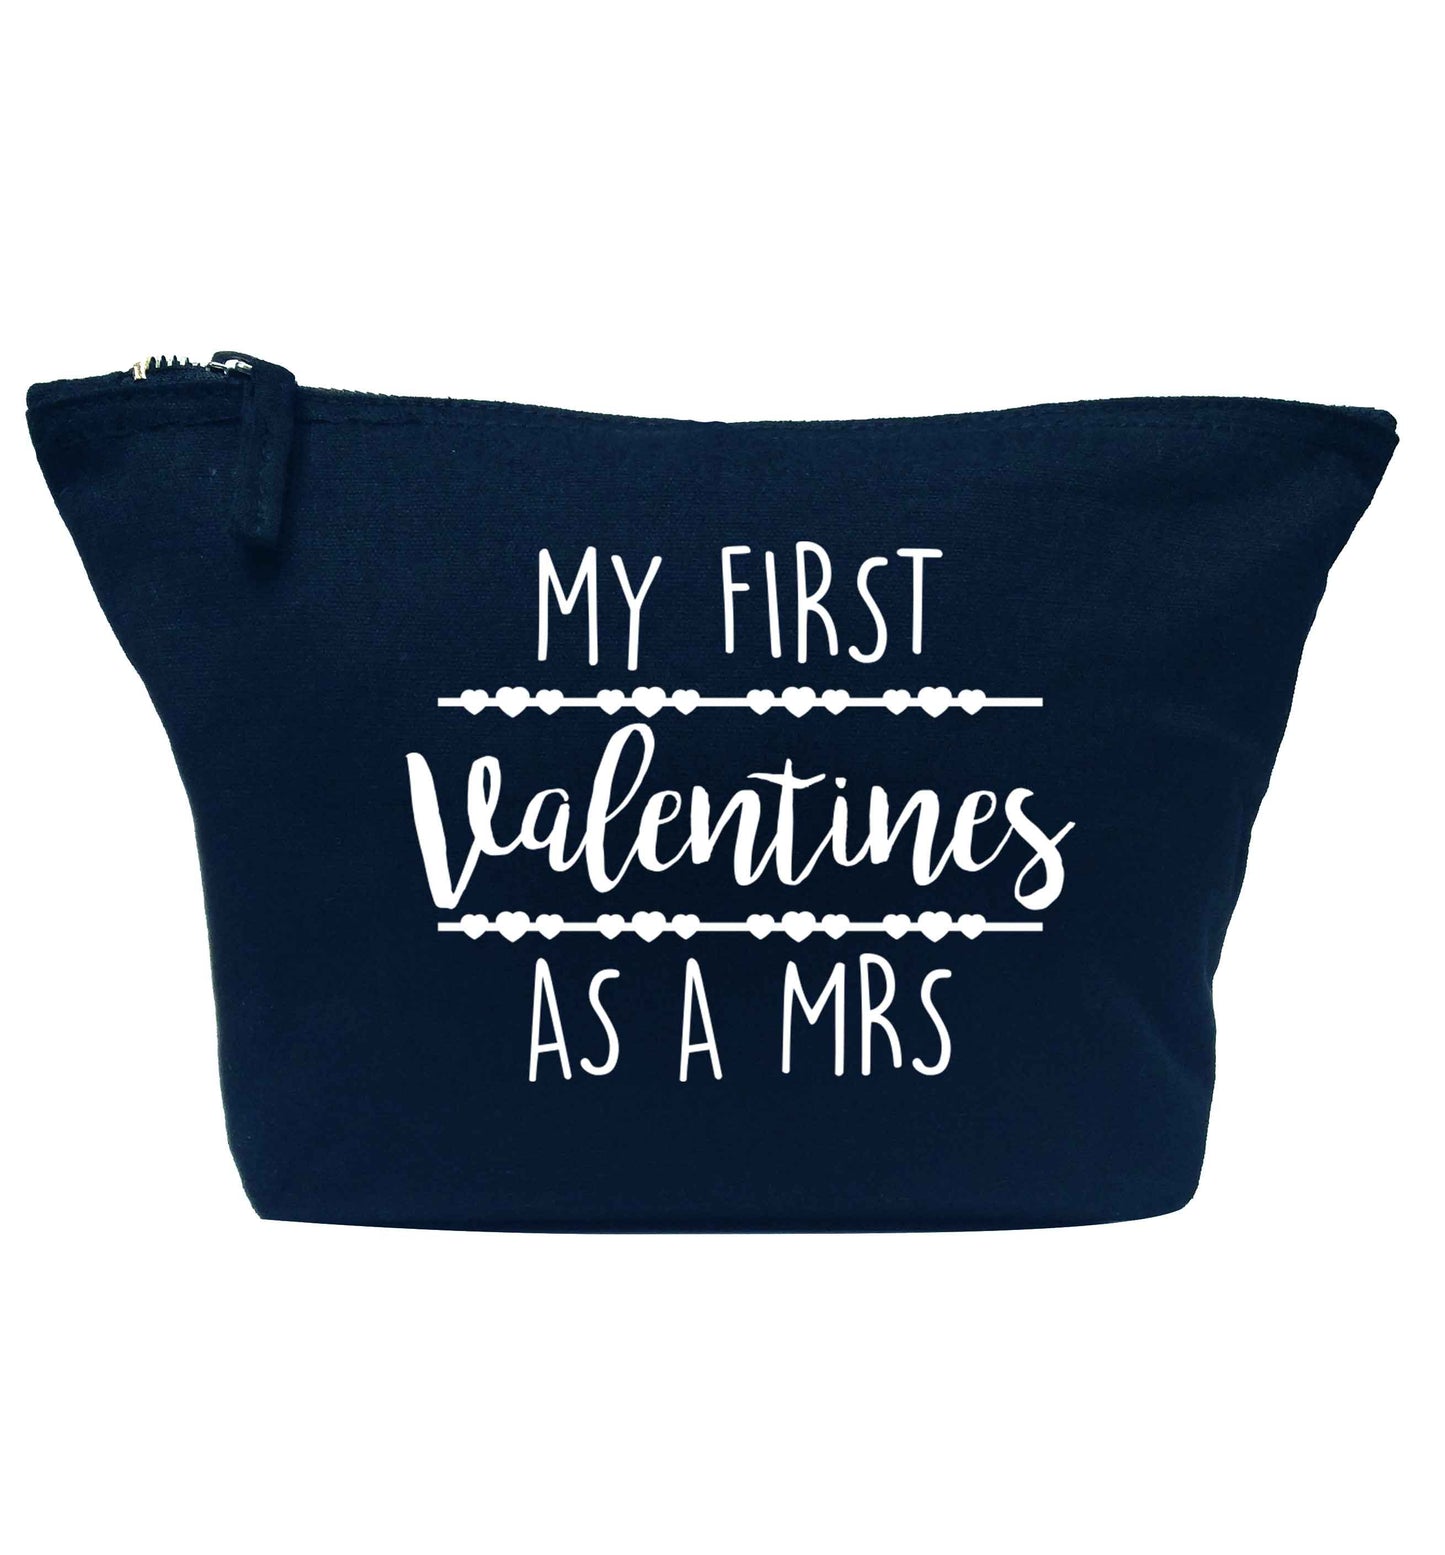 My first valentines as a Mrs navy makeup bag